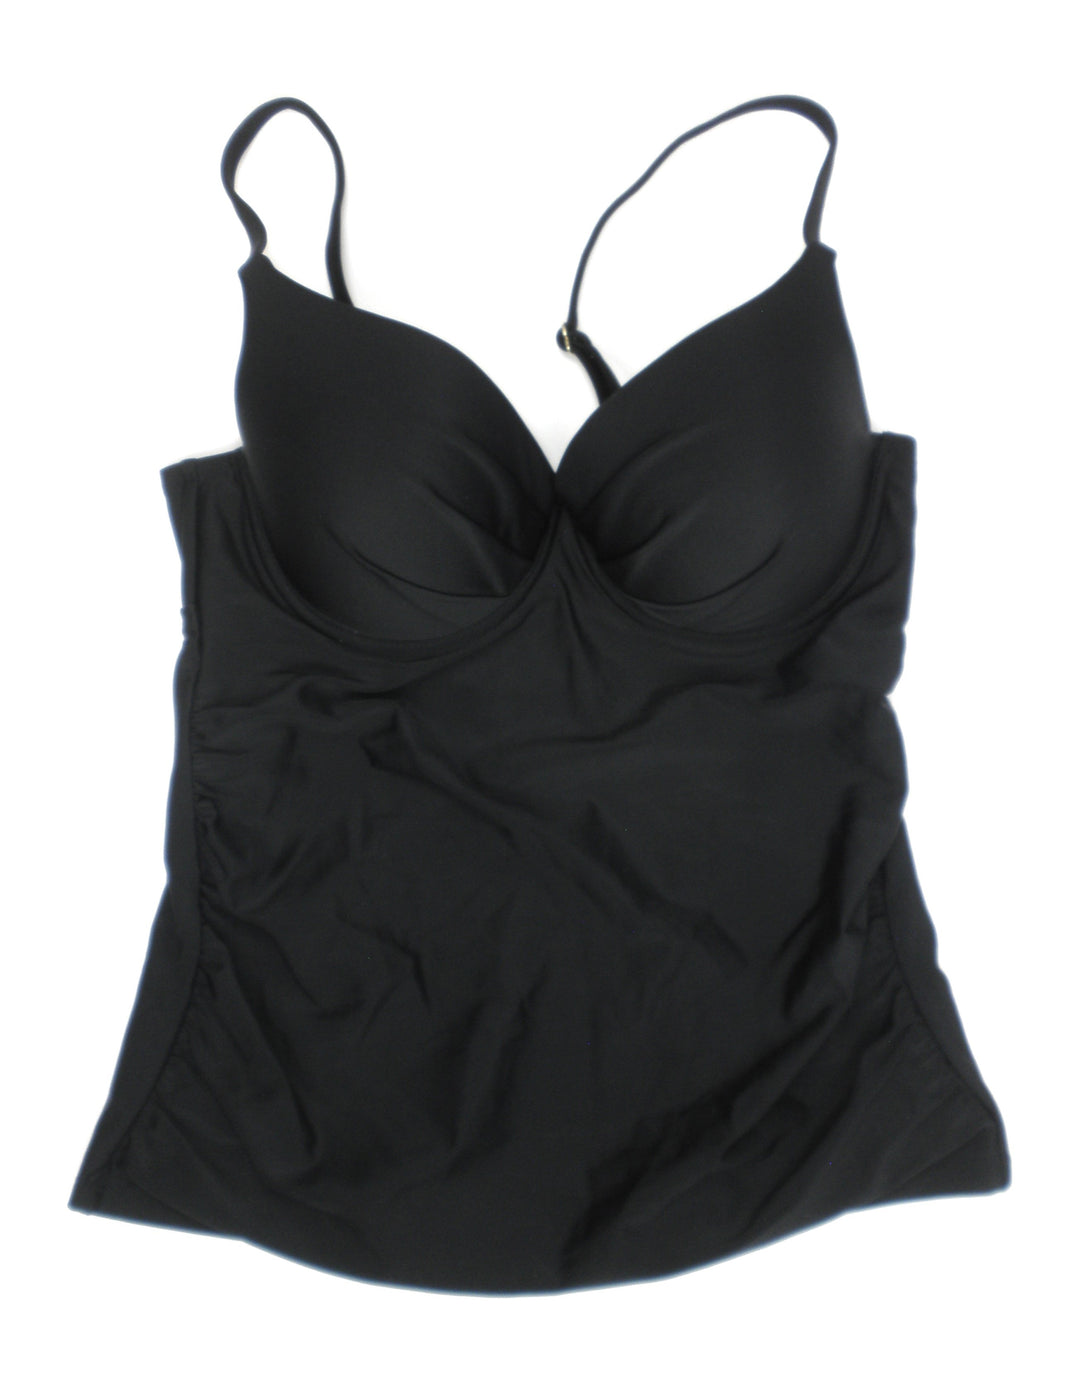 Merona Black Padded Bathing Suit Top - Small - The Fashion Foundation - {{ discount designer}}